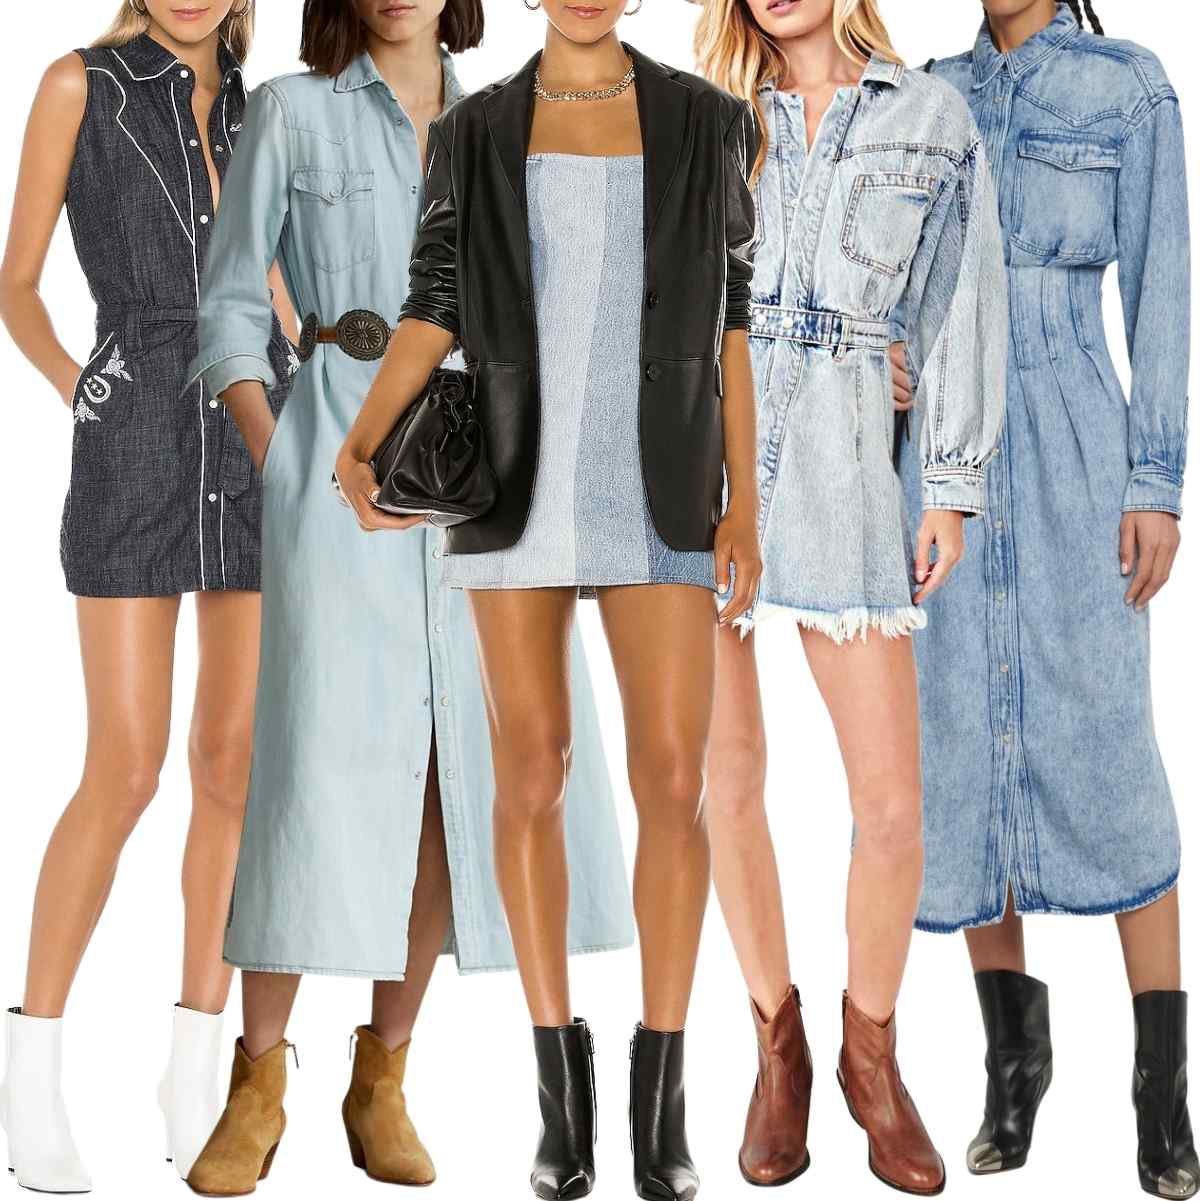 Collage of 5 women wearing different denim dresses with ankle boots.